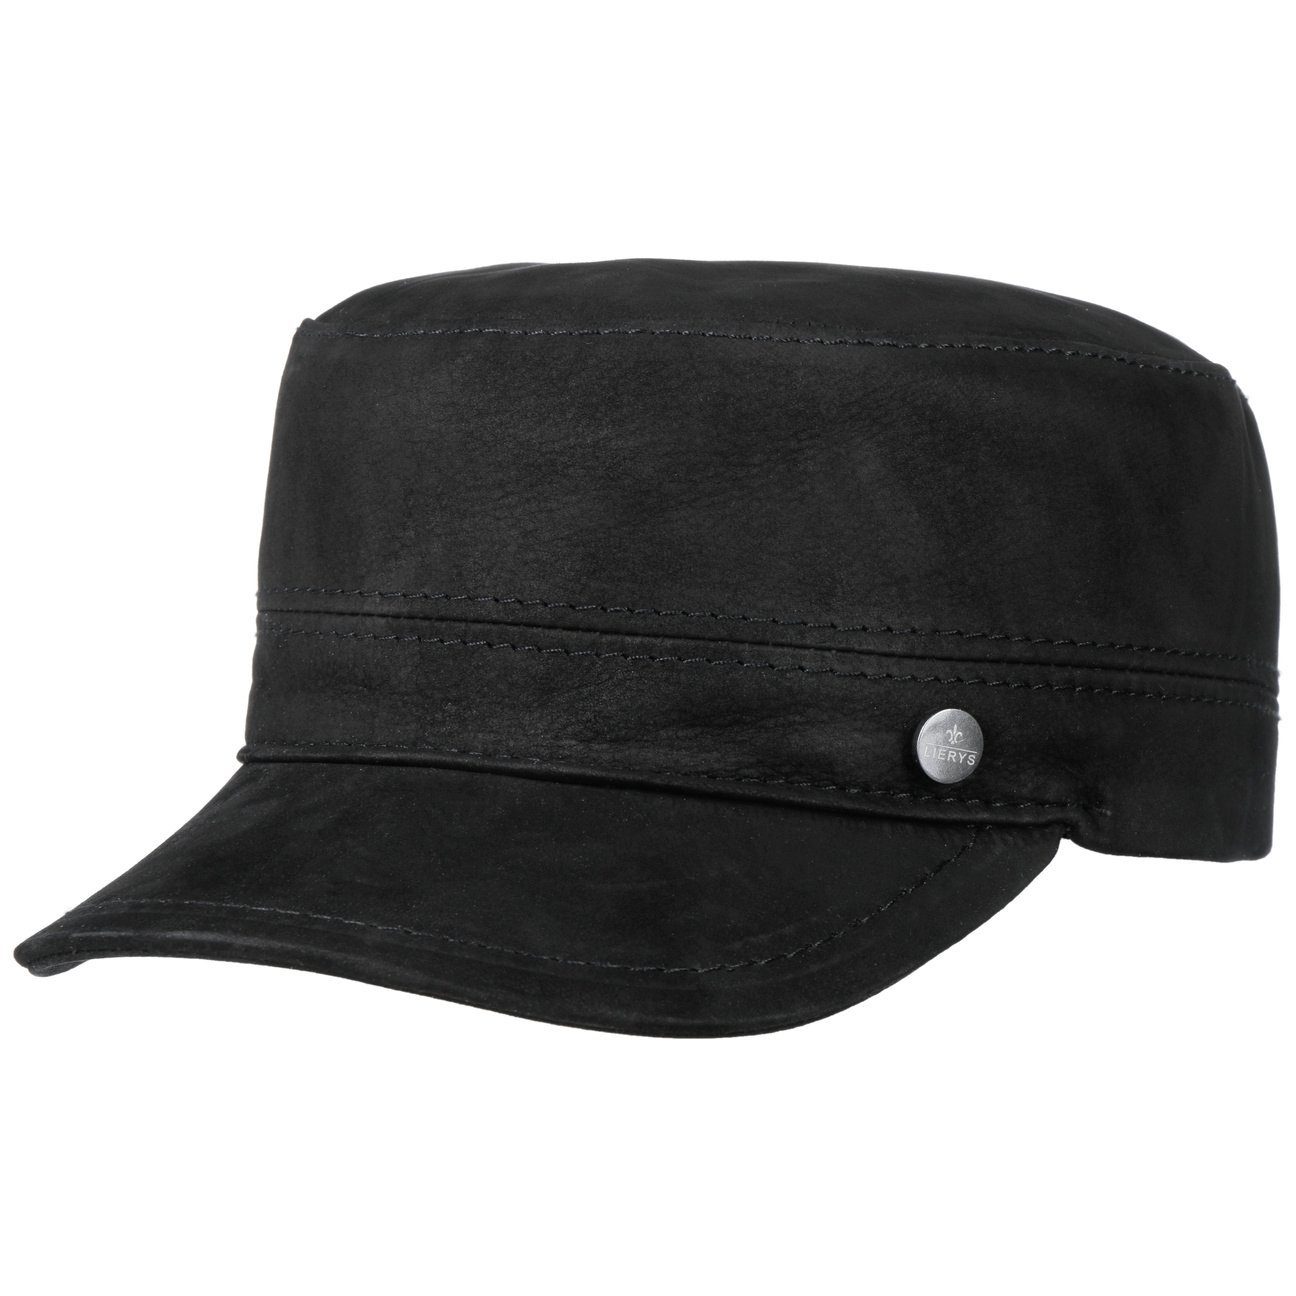 Cap Army mit in Italy Lierys (1-St) Ledercap Schirm, Made